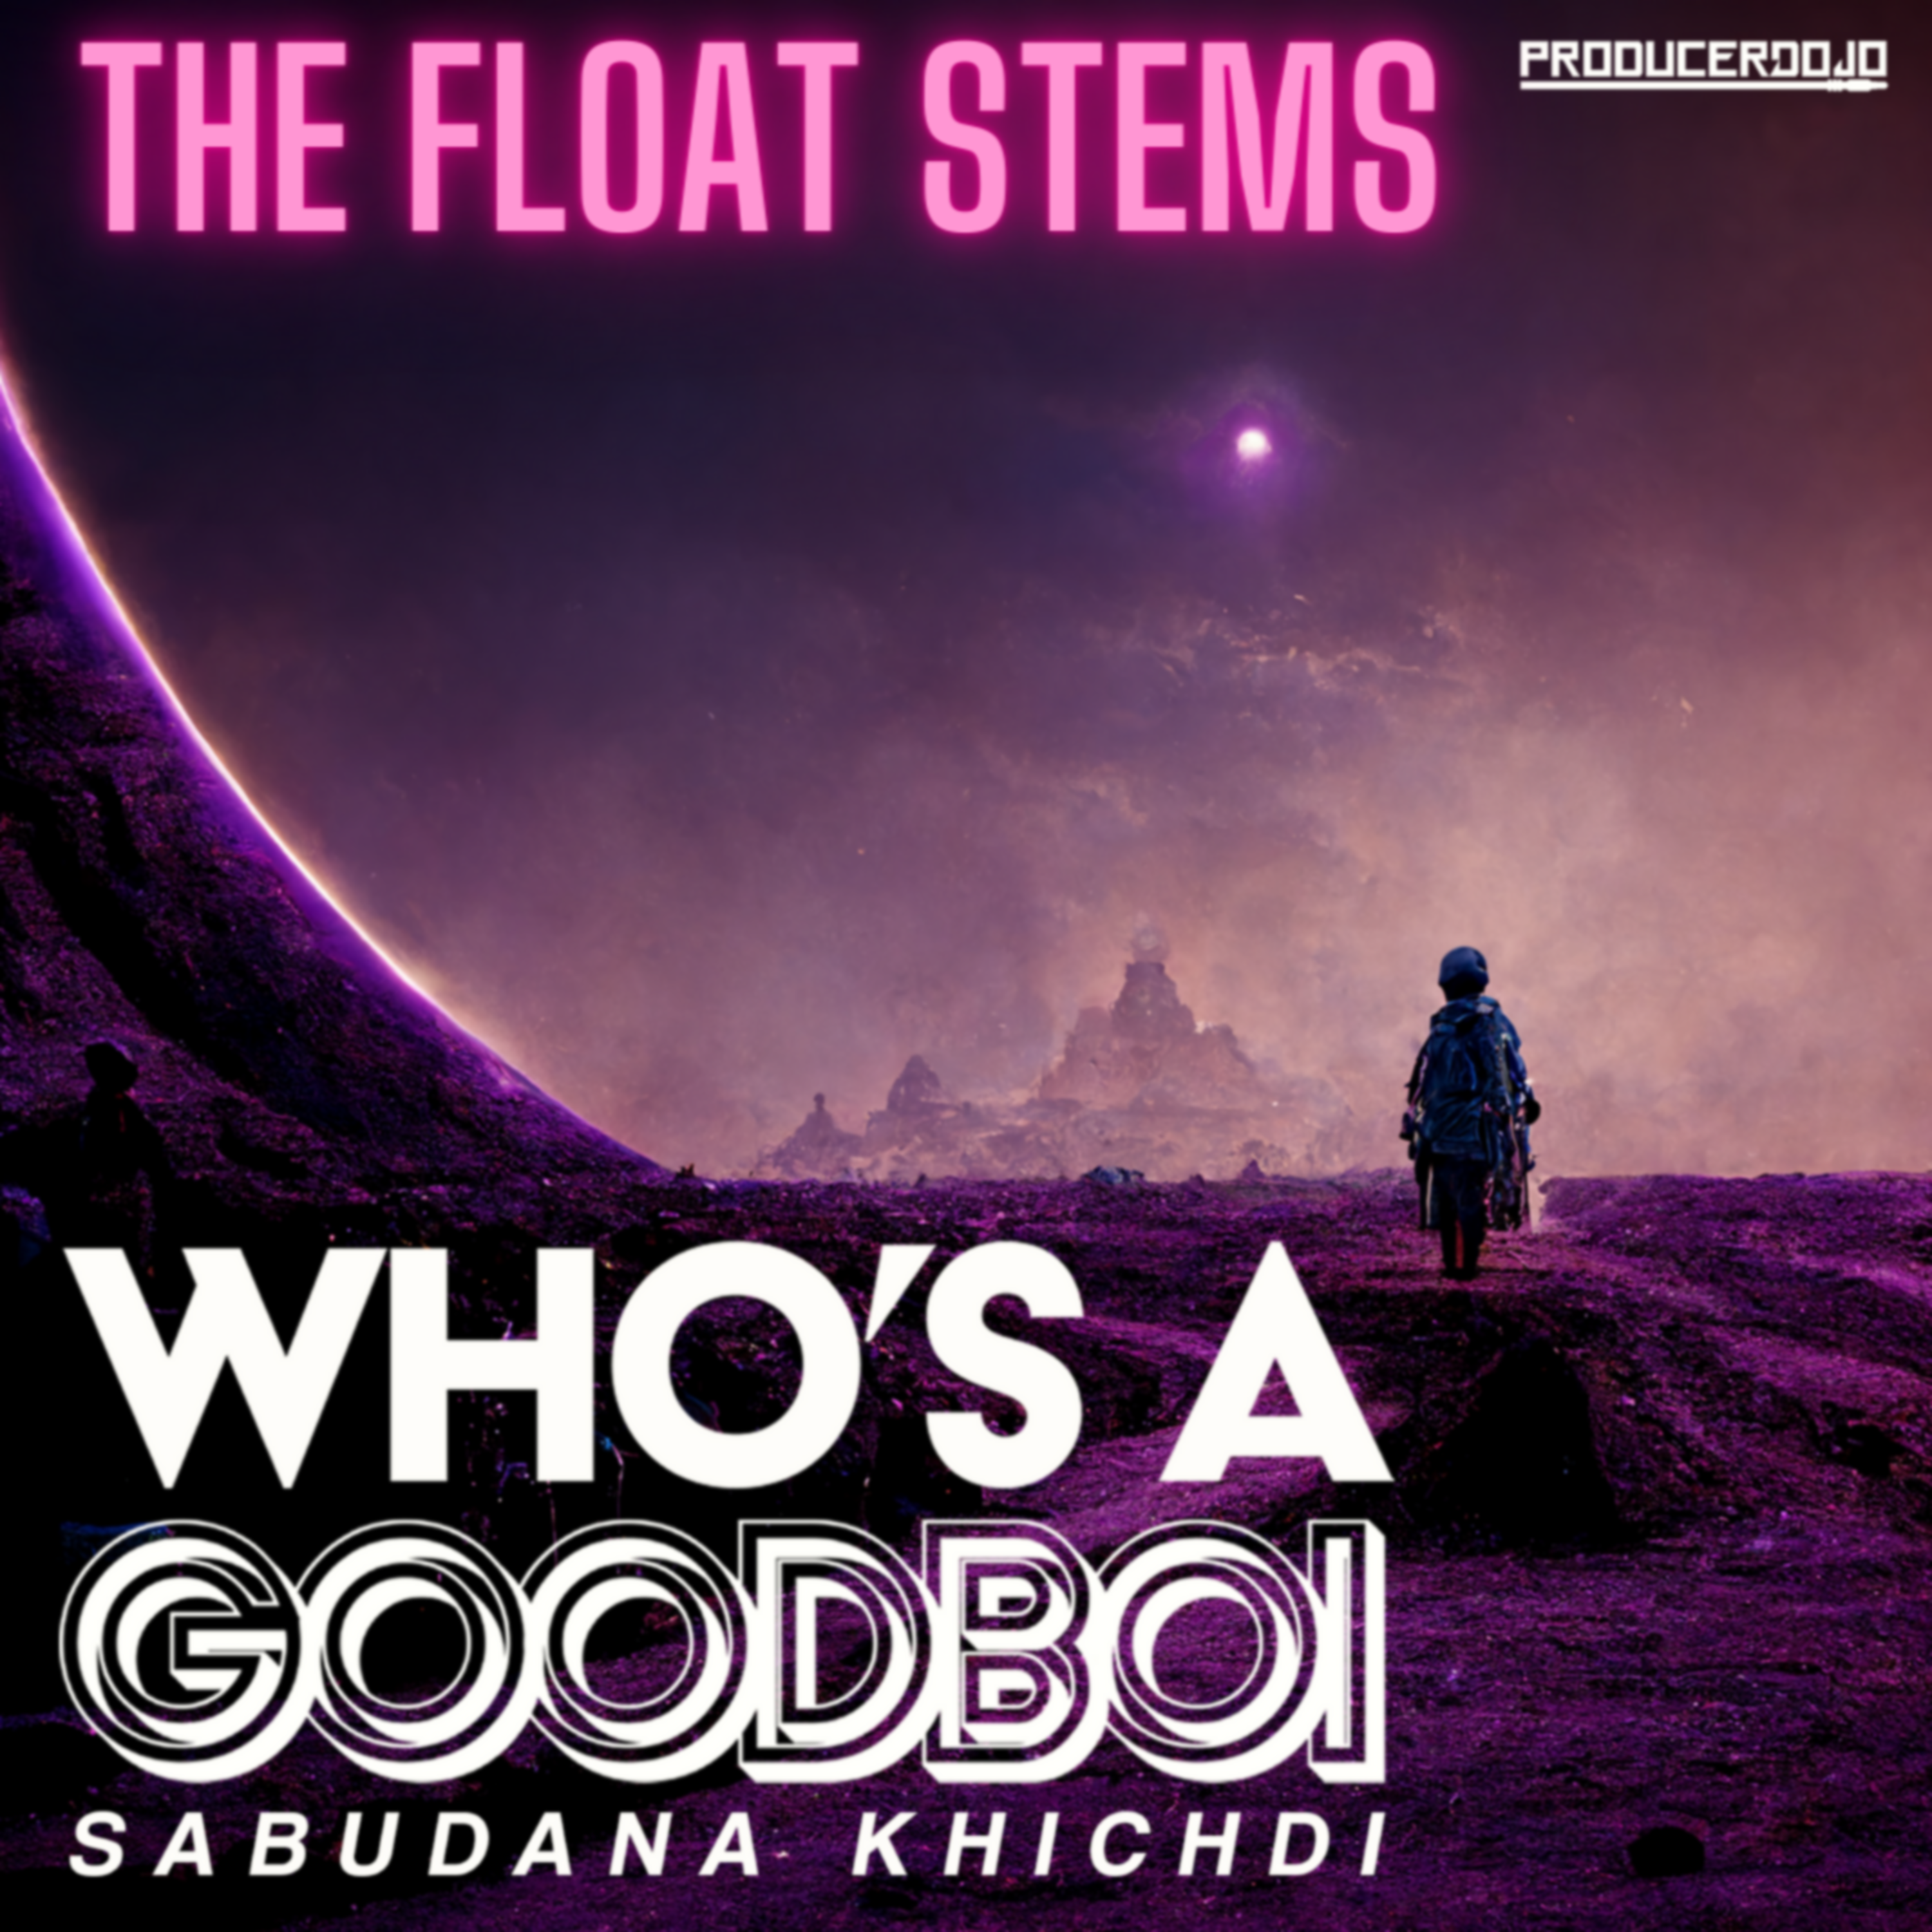 Who's A GoodBoi Stems -The Float